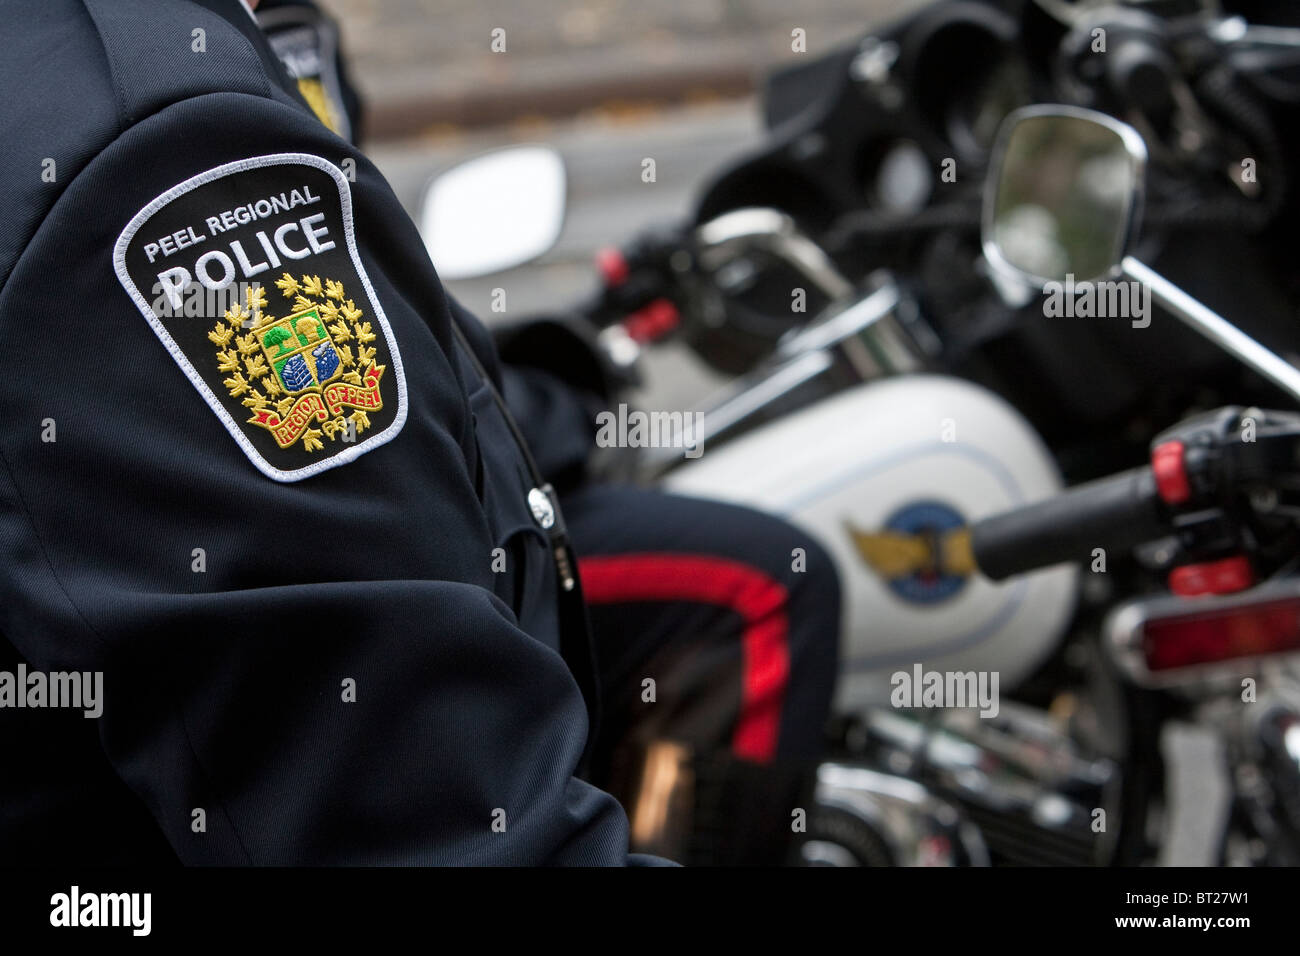 Peel Regional Police motorcycle is seen during a police memorial parade in Ottawa Sunday September 26, 2010. Stock Photo